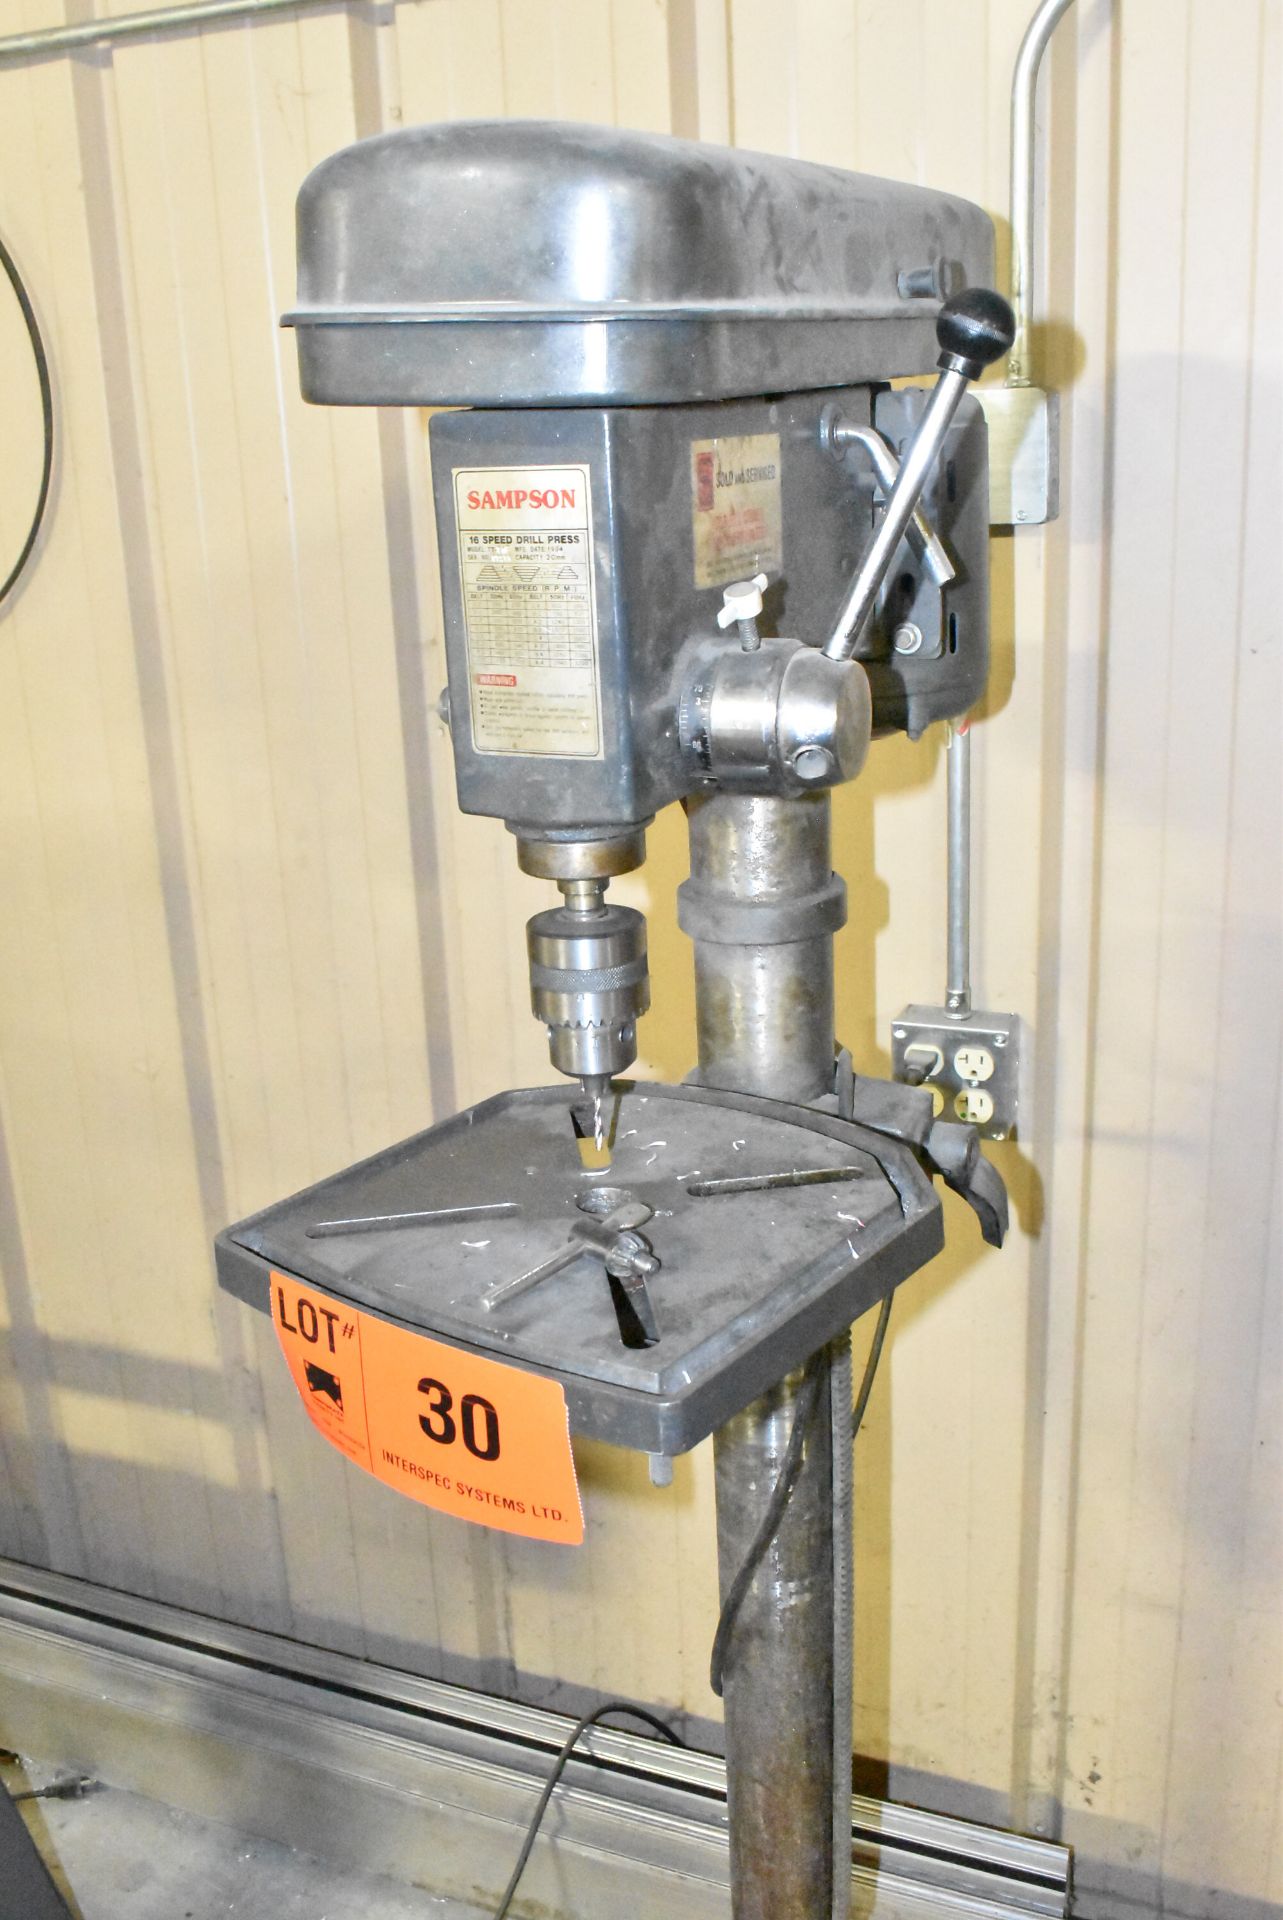 SAMPSON 16F 16 SPEED FLOOR TYPE DRILL PRESS WITH SPEEDS TO 3600RPM, S/N 97215 [RIGGING FOR FOR - Image 3 of 3